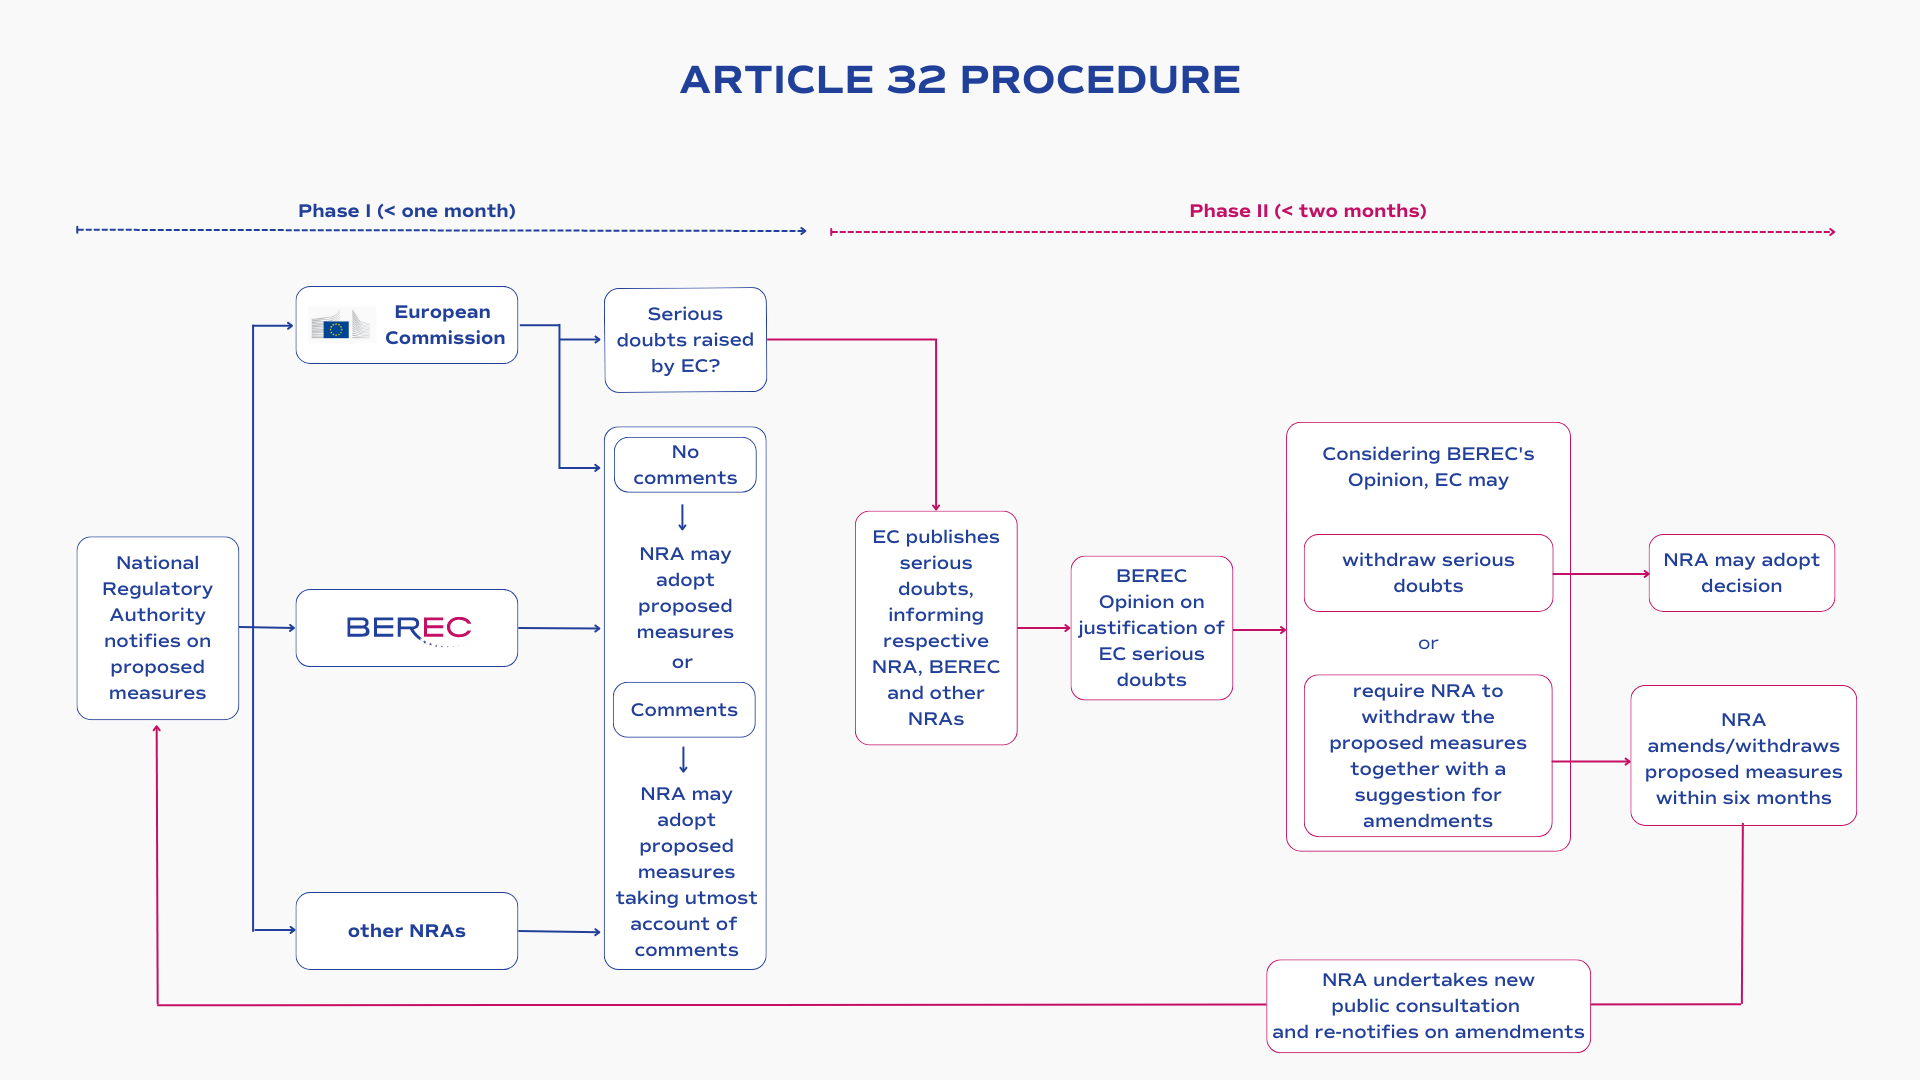 The image visualises the Article 32 proocedure, described in the text on this page